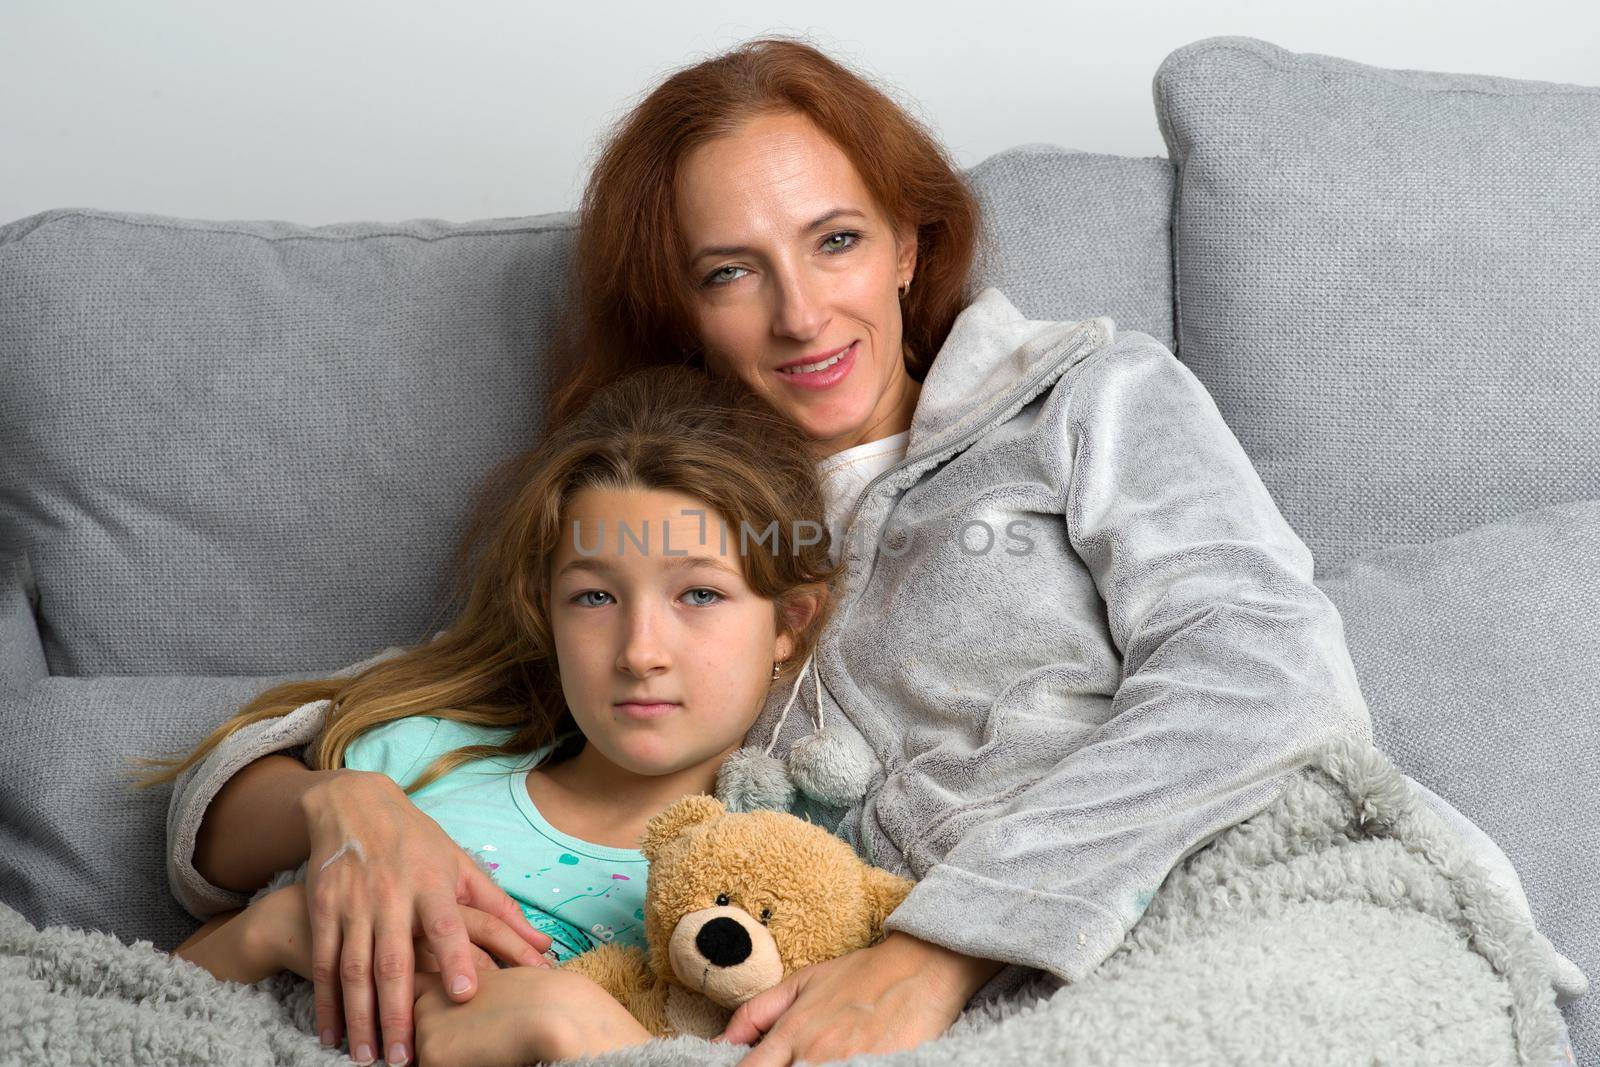 Happy mom sitting on couch with her preteen daughter. Smiling loving mother hugging her daughter lying with teddy bear toy. Woman and child wearing indoor clothes sitting together covered with plaid